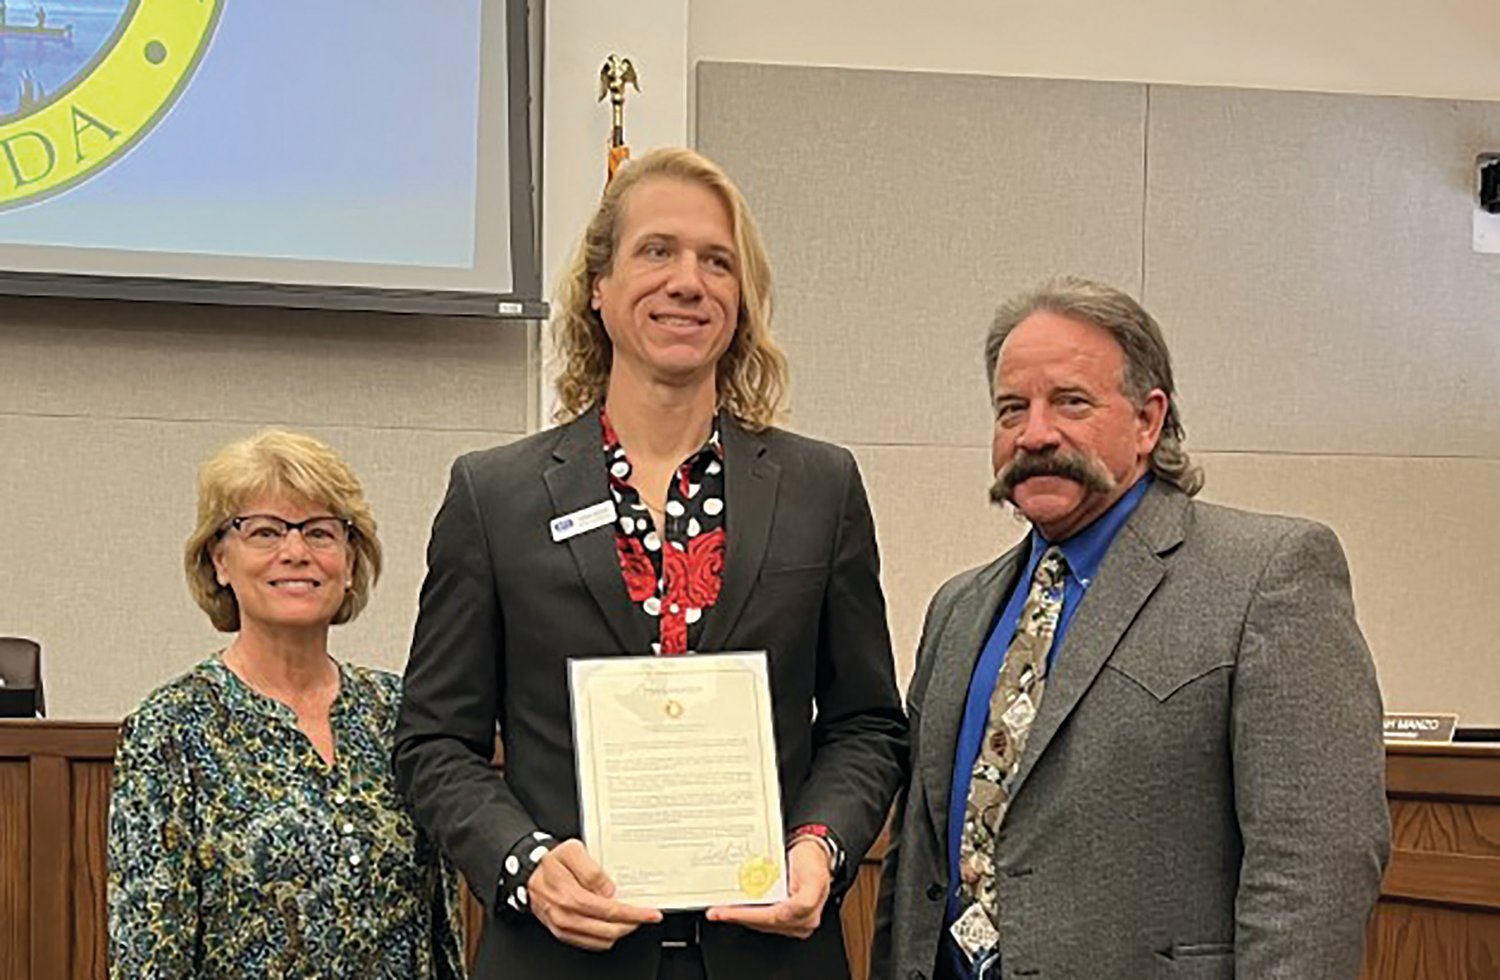 OKEECHOBEE -- At the Jan. 26 meeting of the Okeechobee County Commission, Commissioners Kelly Owens (left) and Brad Goodbread (right) presented Chad Adcock (center) with a proclamation in honor of 211 Helpline Awareness Month.